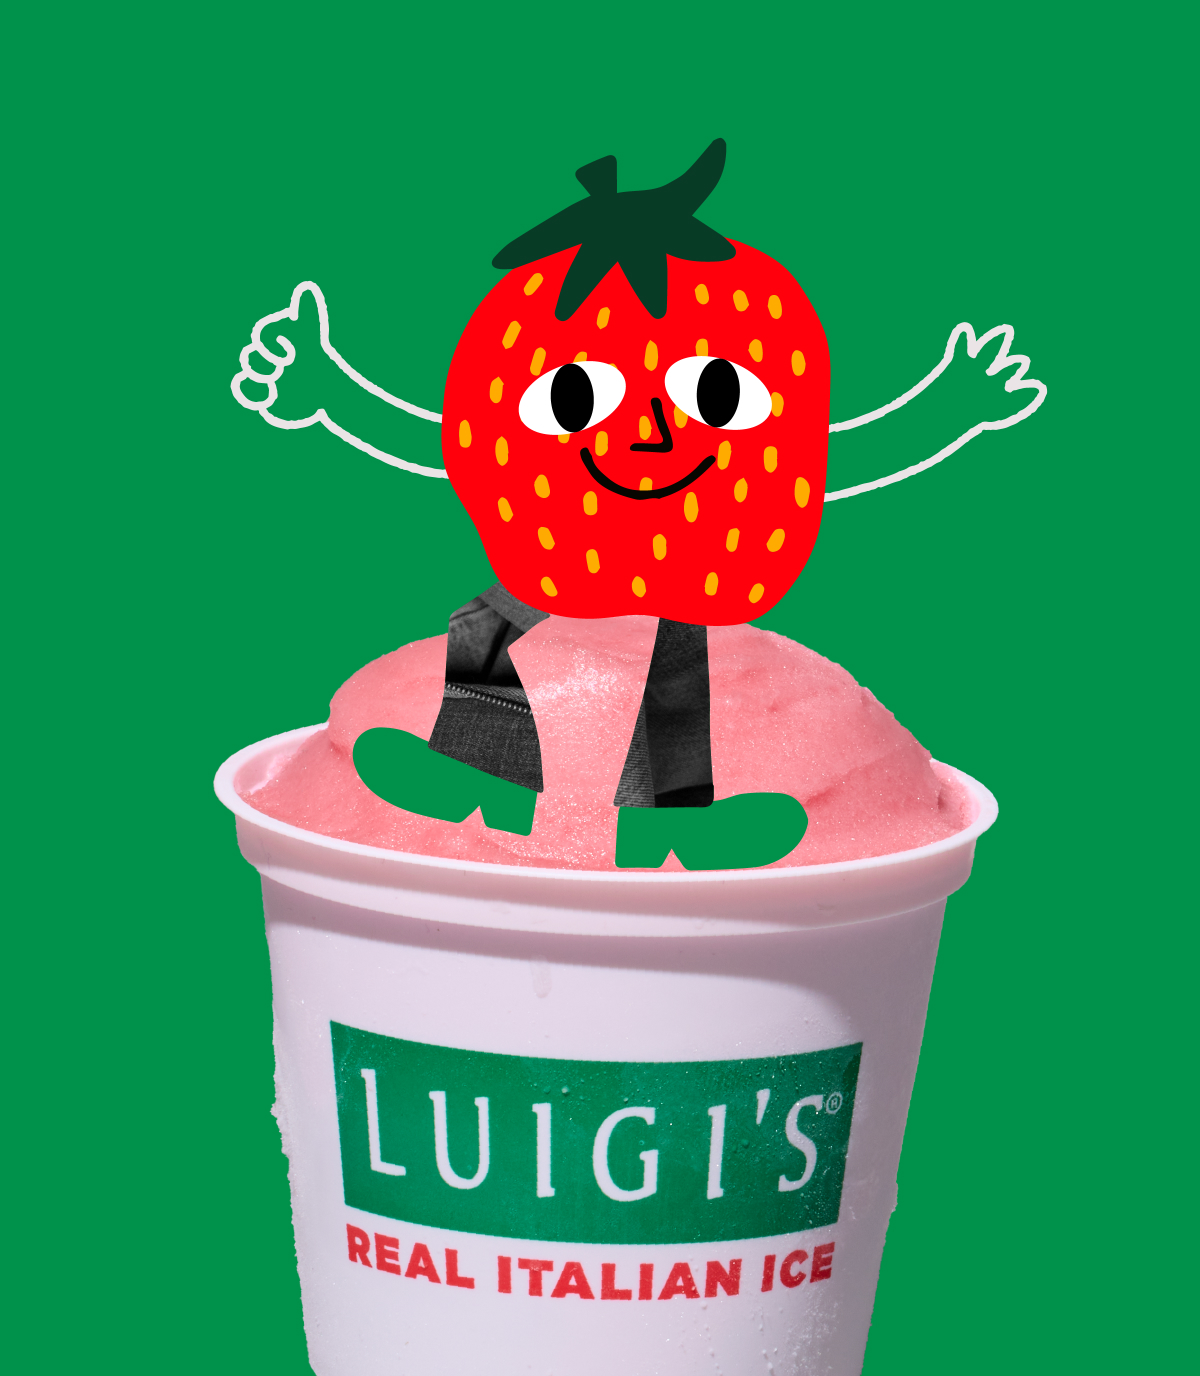 Strawberry character graphic is sitting on top of strawberry LUIGI'S Real Italian Ice. Strawberry is smiling and giving thumbs up. Background is green.